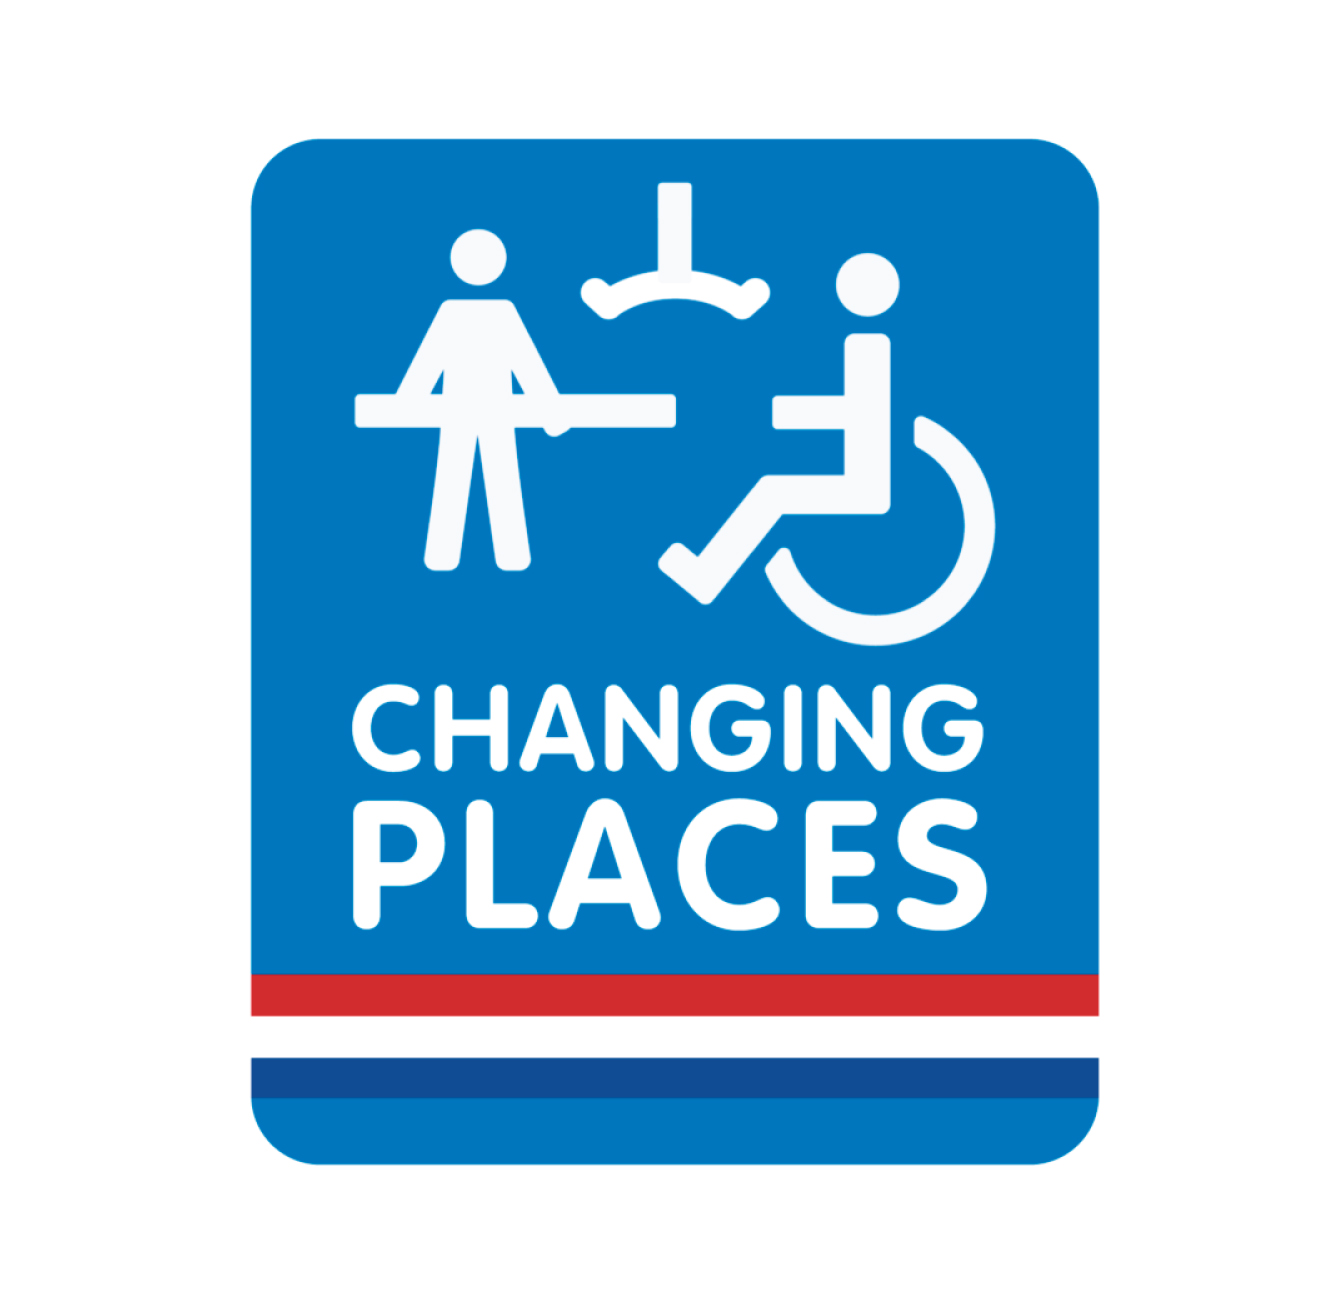 The logo of changing Places